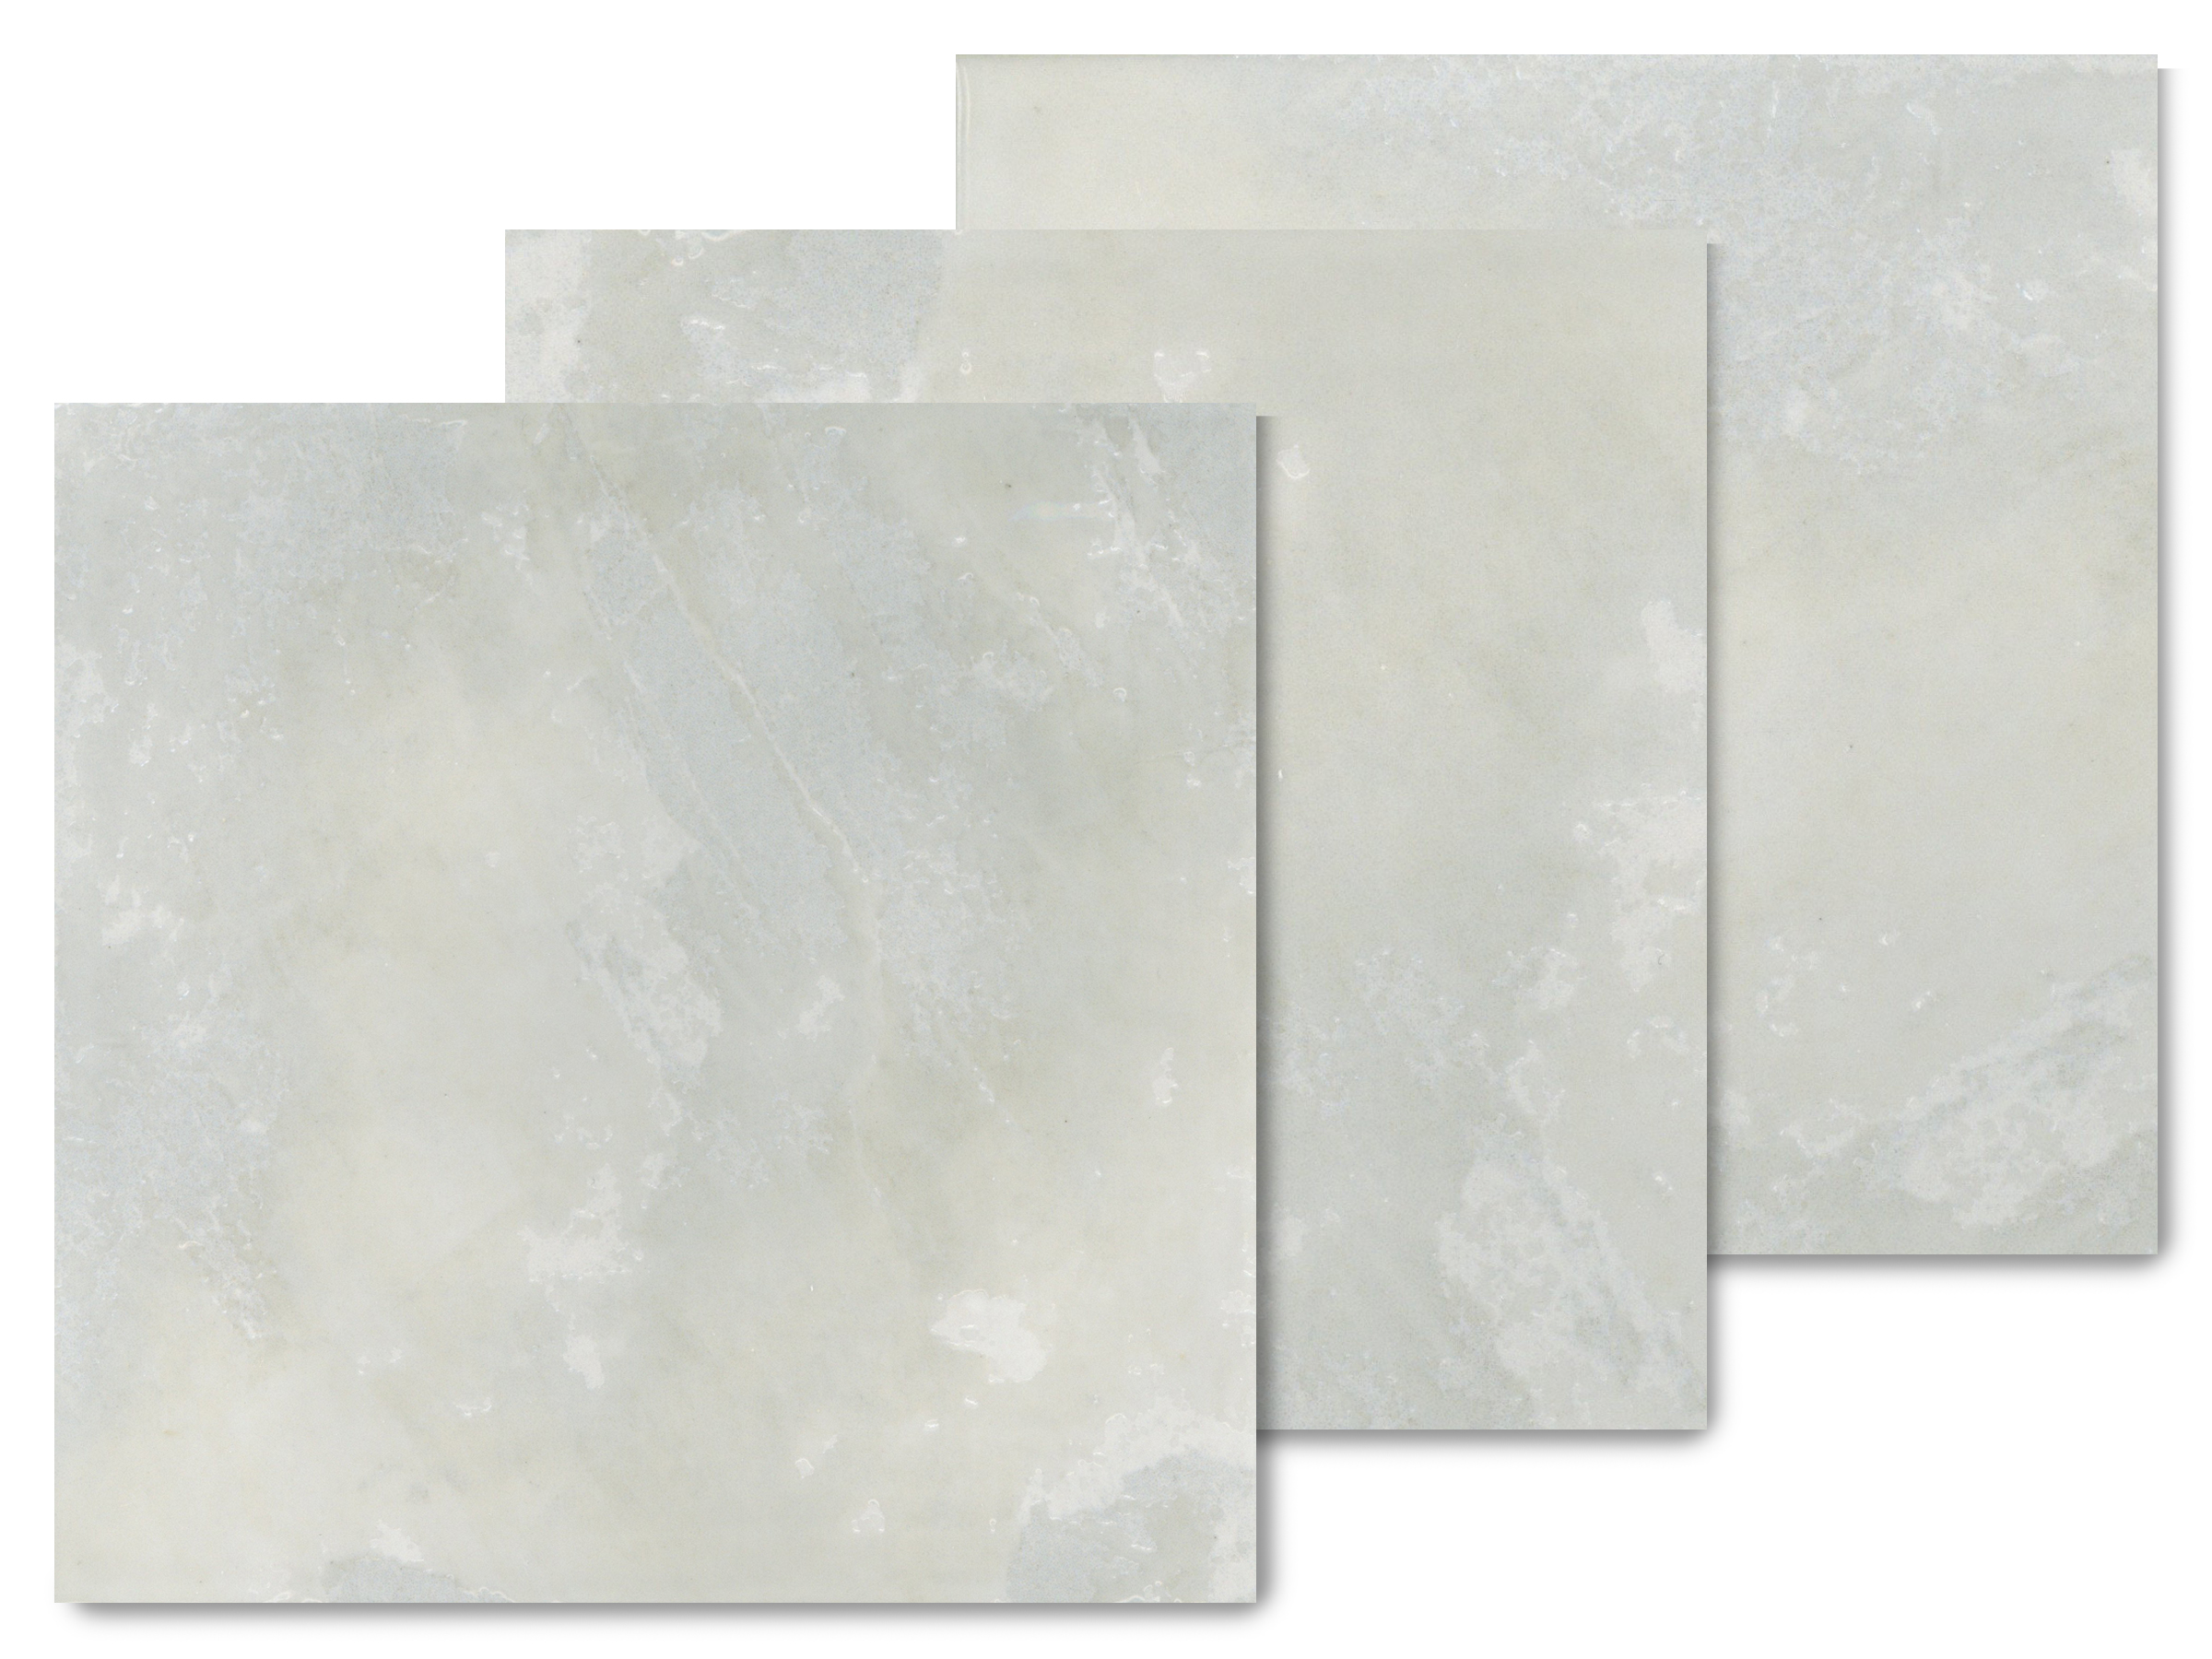 Everest 6 inch by 6 inch tile